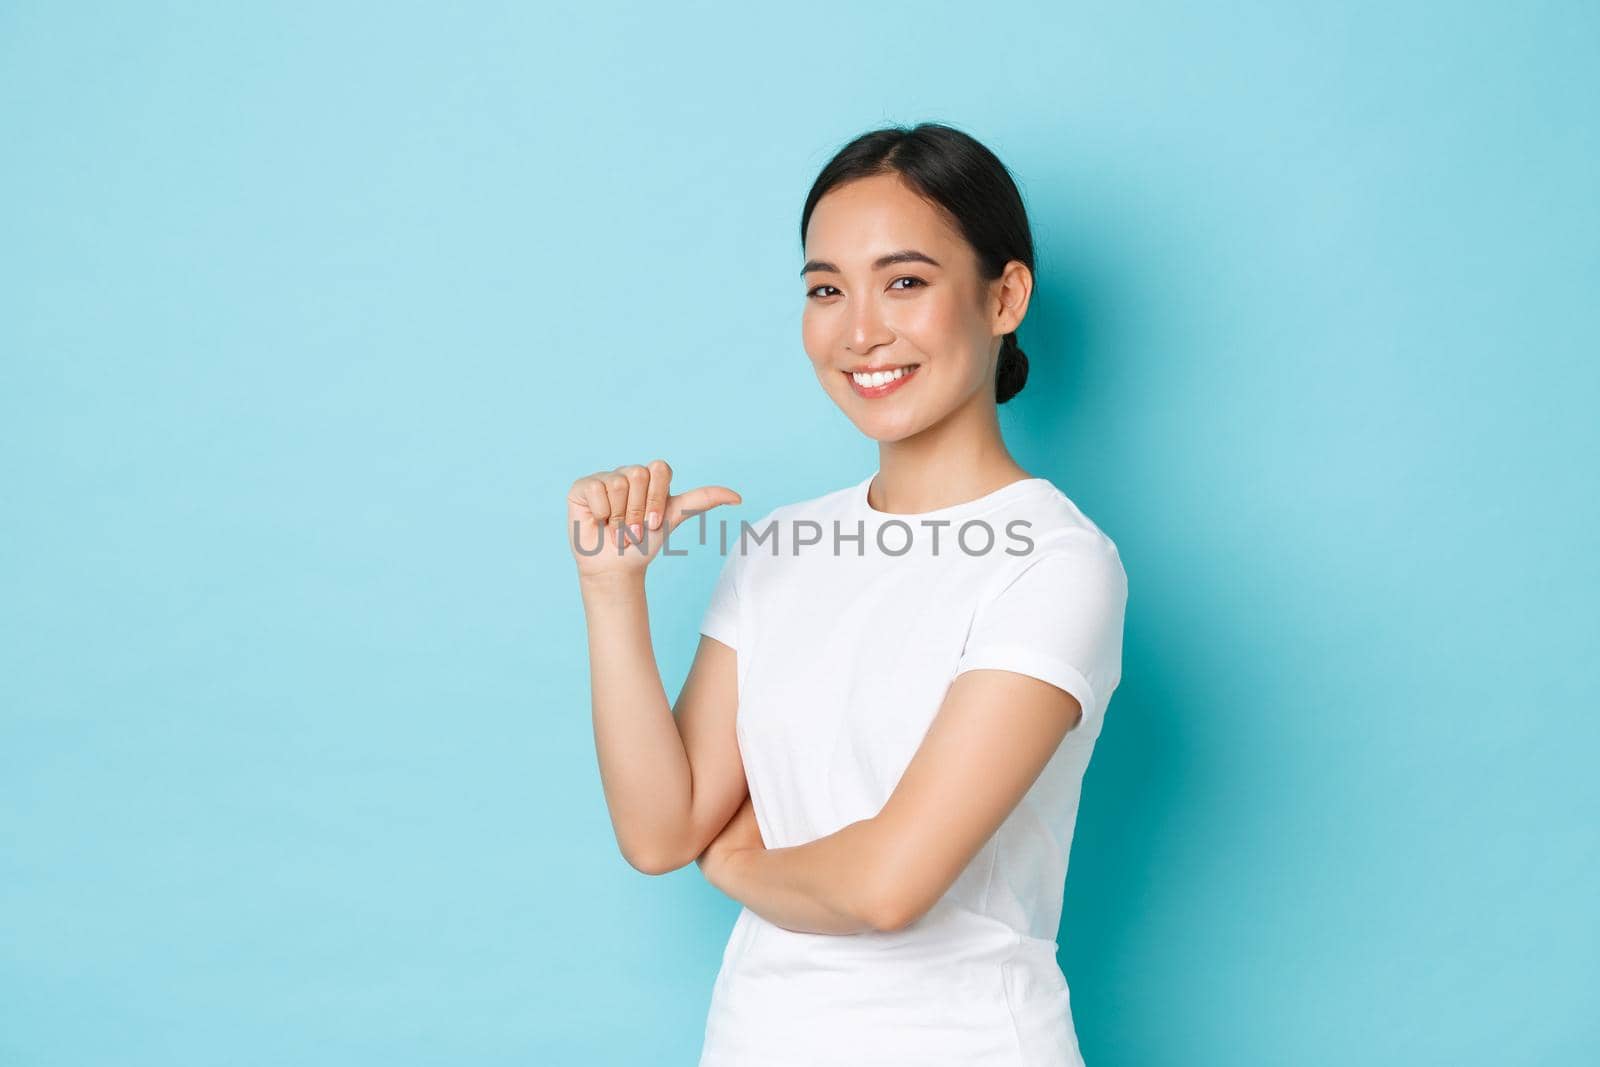 Confident smiling asian girl in white t-shirt pointing at herself with proud, assertive expression, show-off, promote own abilities, being professional, searching for job, standing blue background.